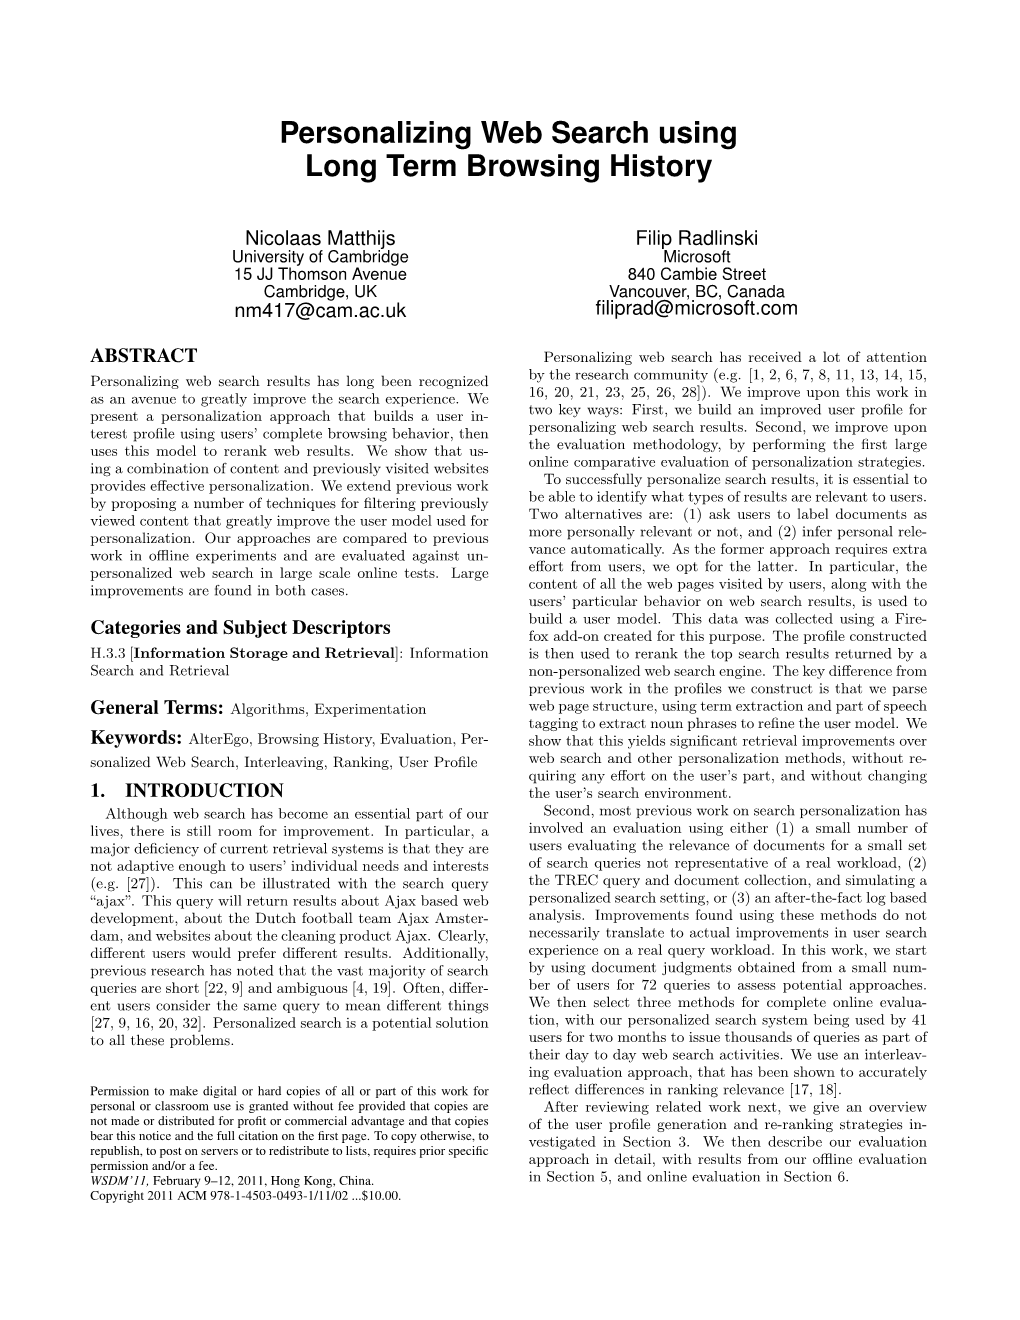 Personalizing Web Search Using Long Term Browsing History